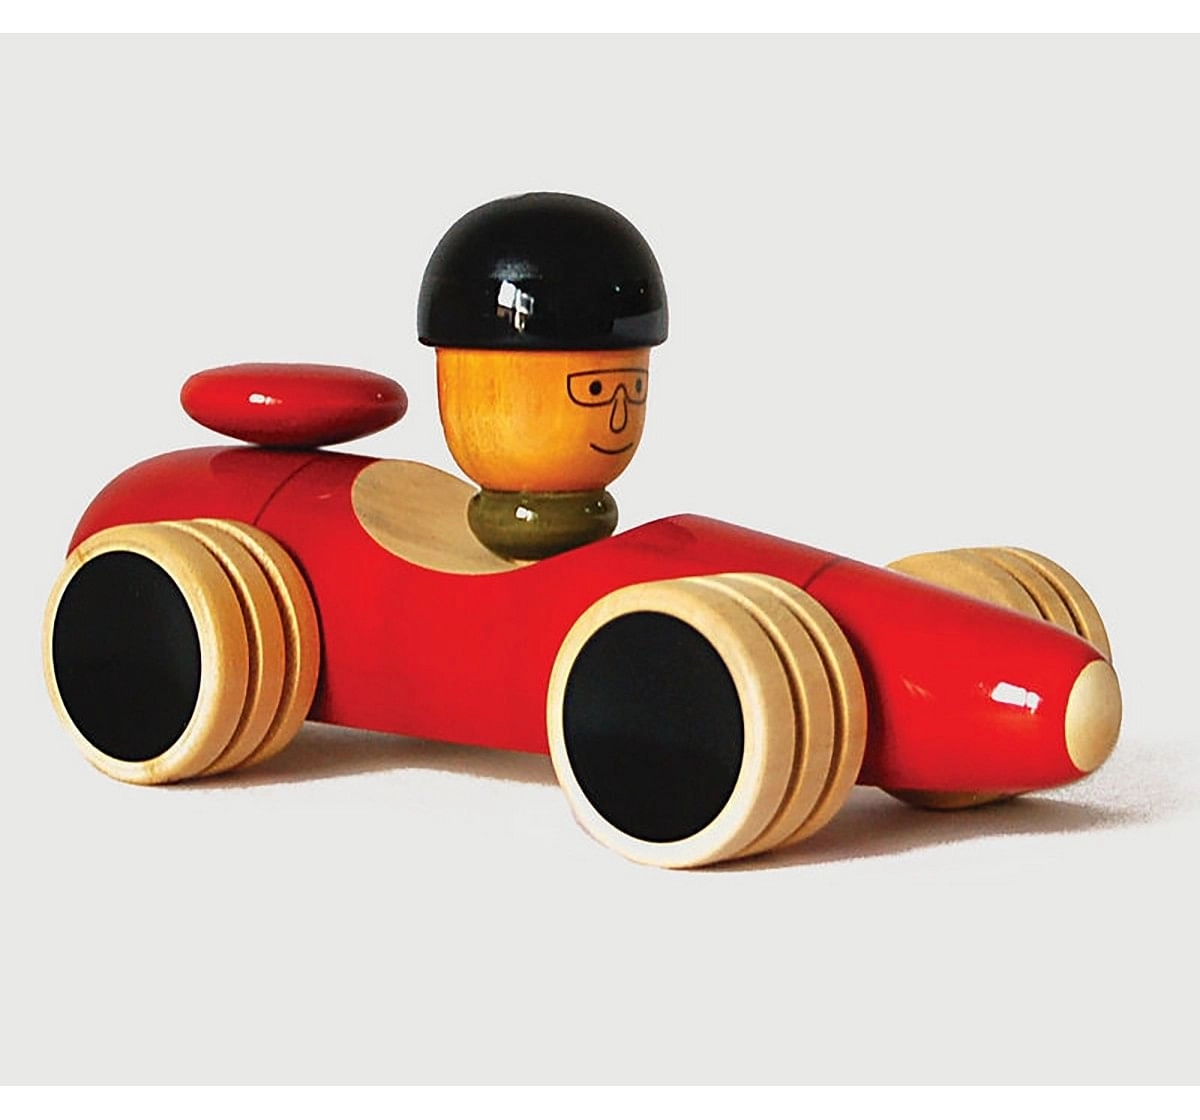 Fairkraft Creations Handmade Wooden Vroom Toy 1 Wooden Toys for Kids age 1Y+ (Red)